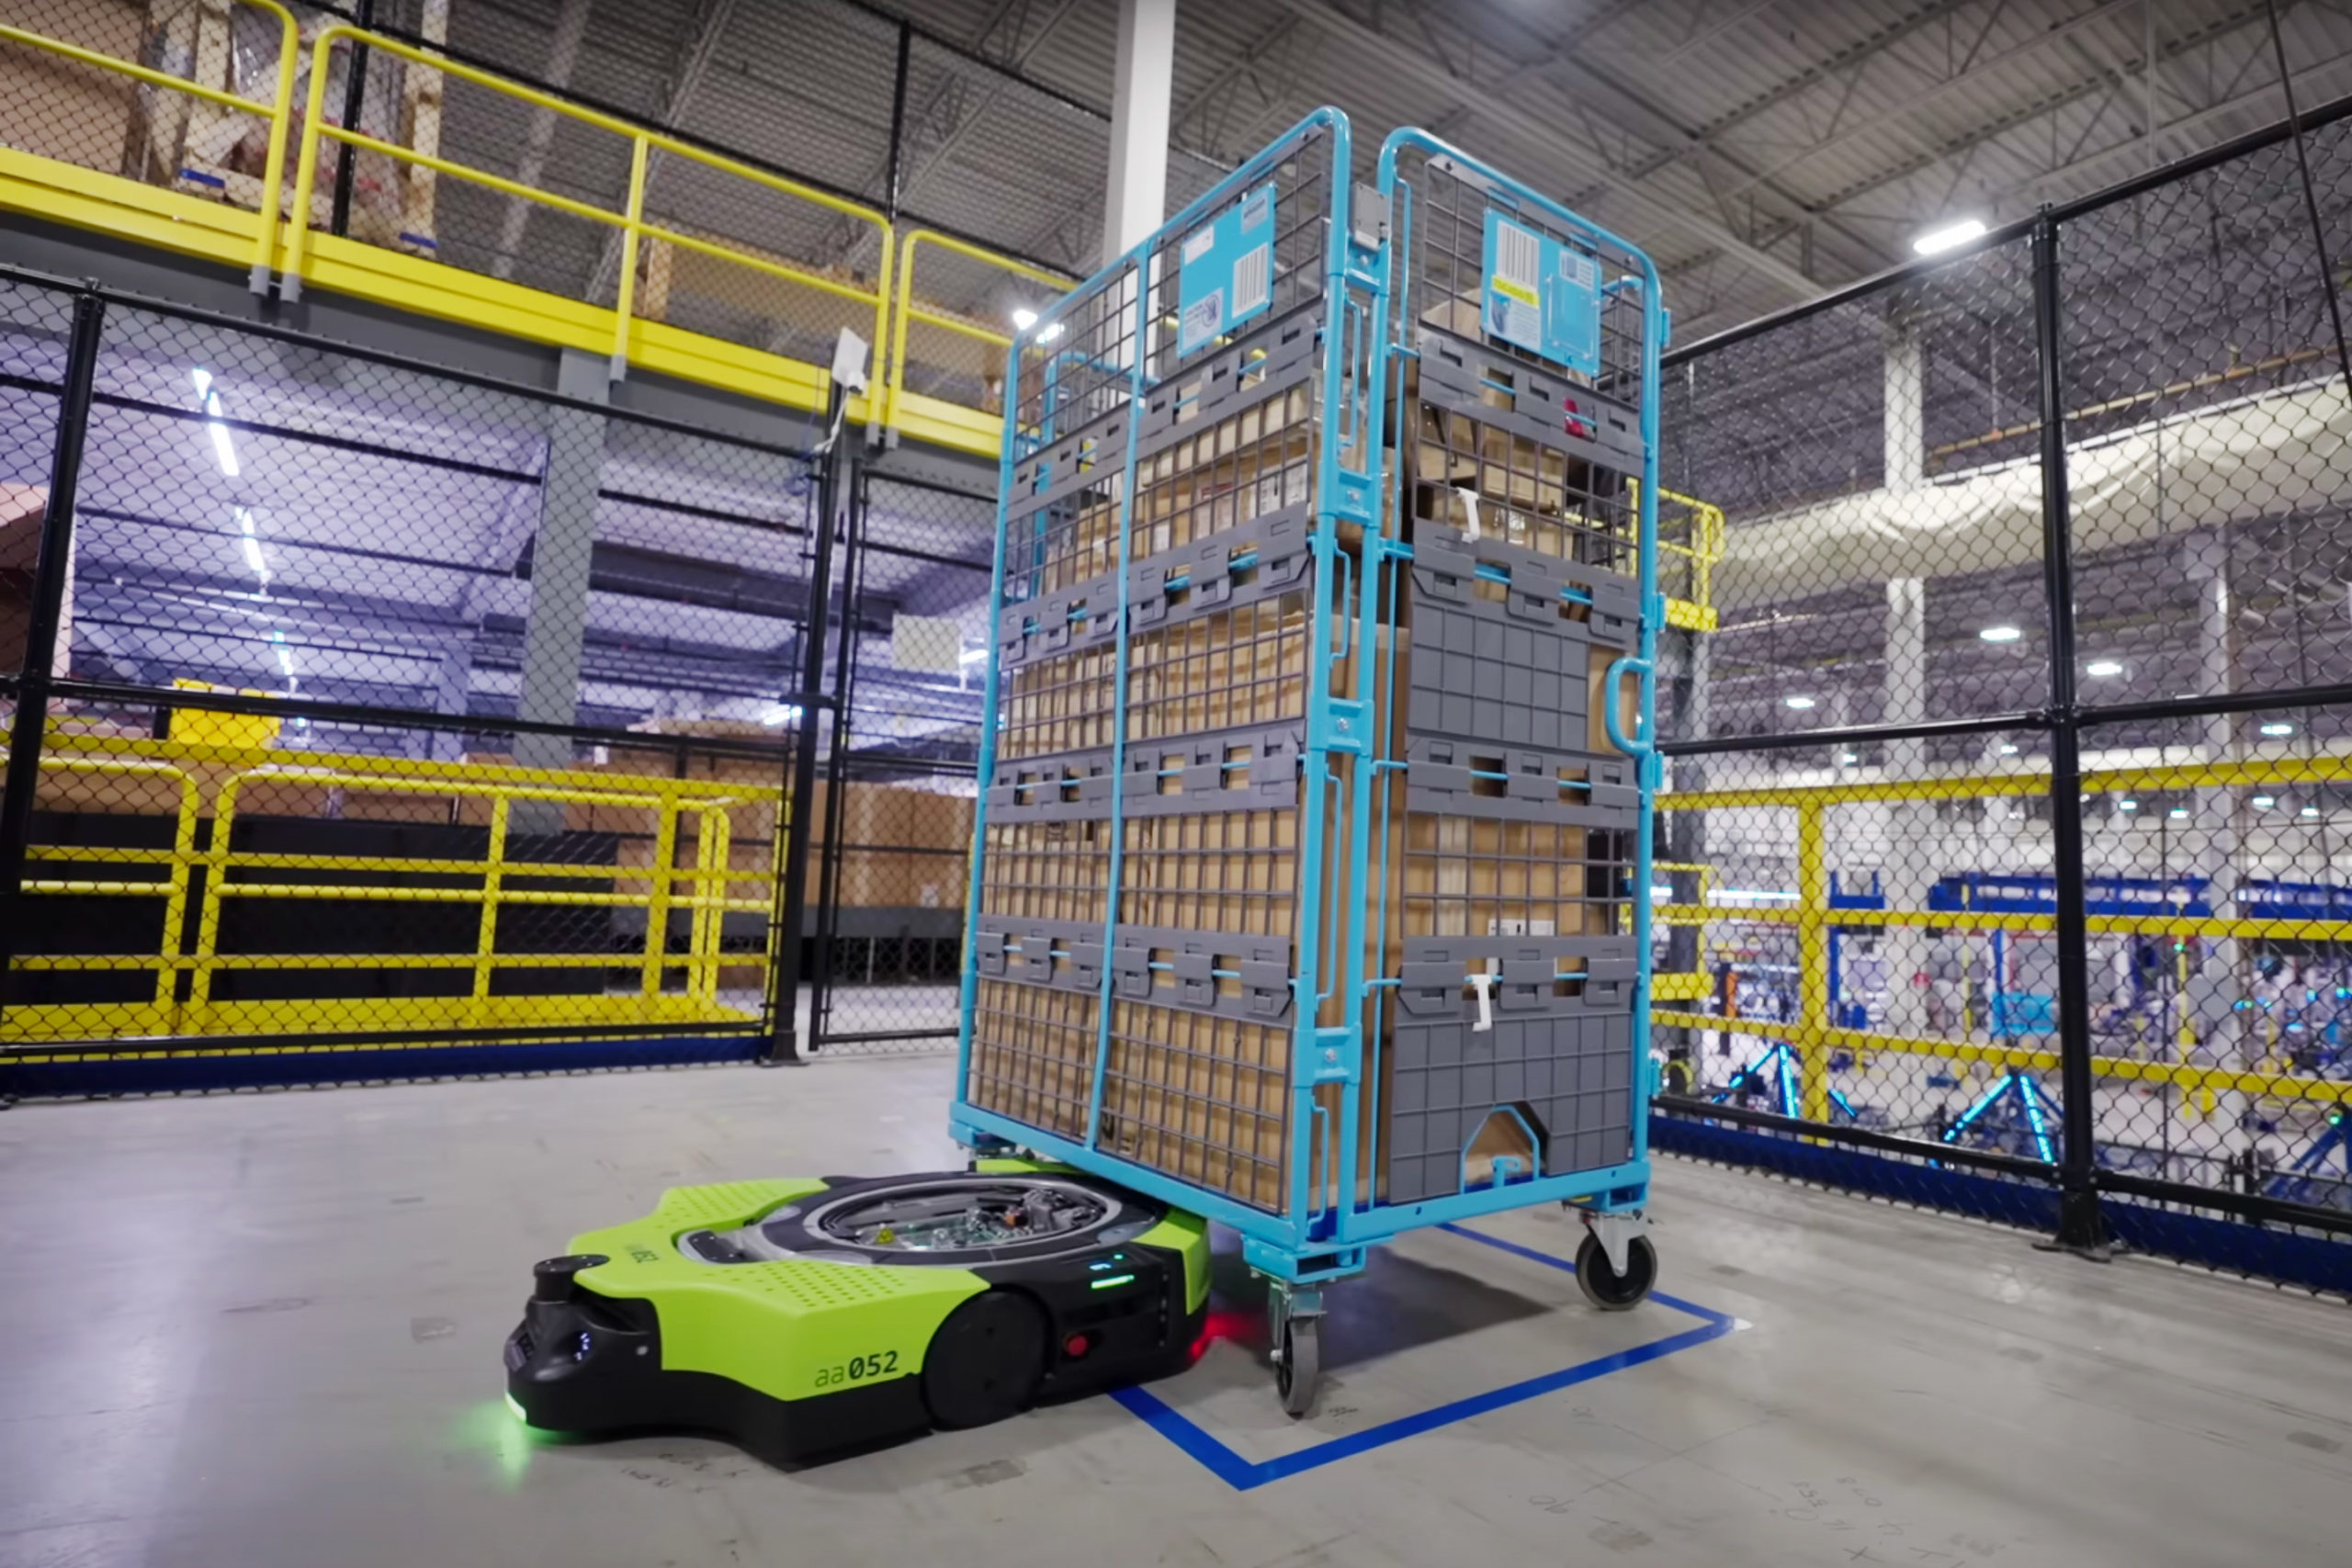 The Amazon robots are here and they don't even have to be kept in cages anymore